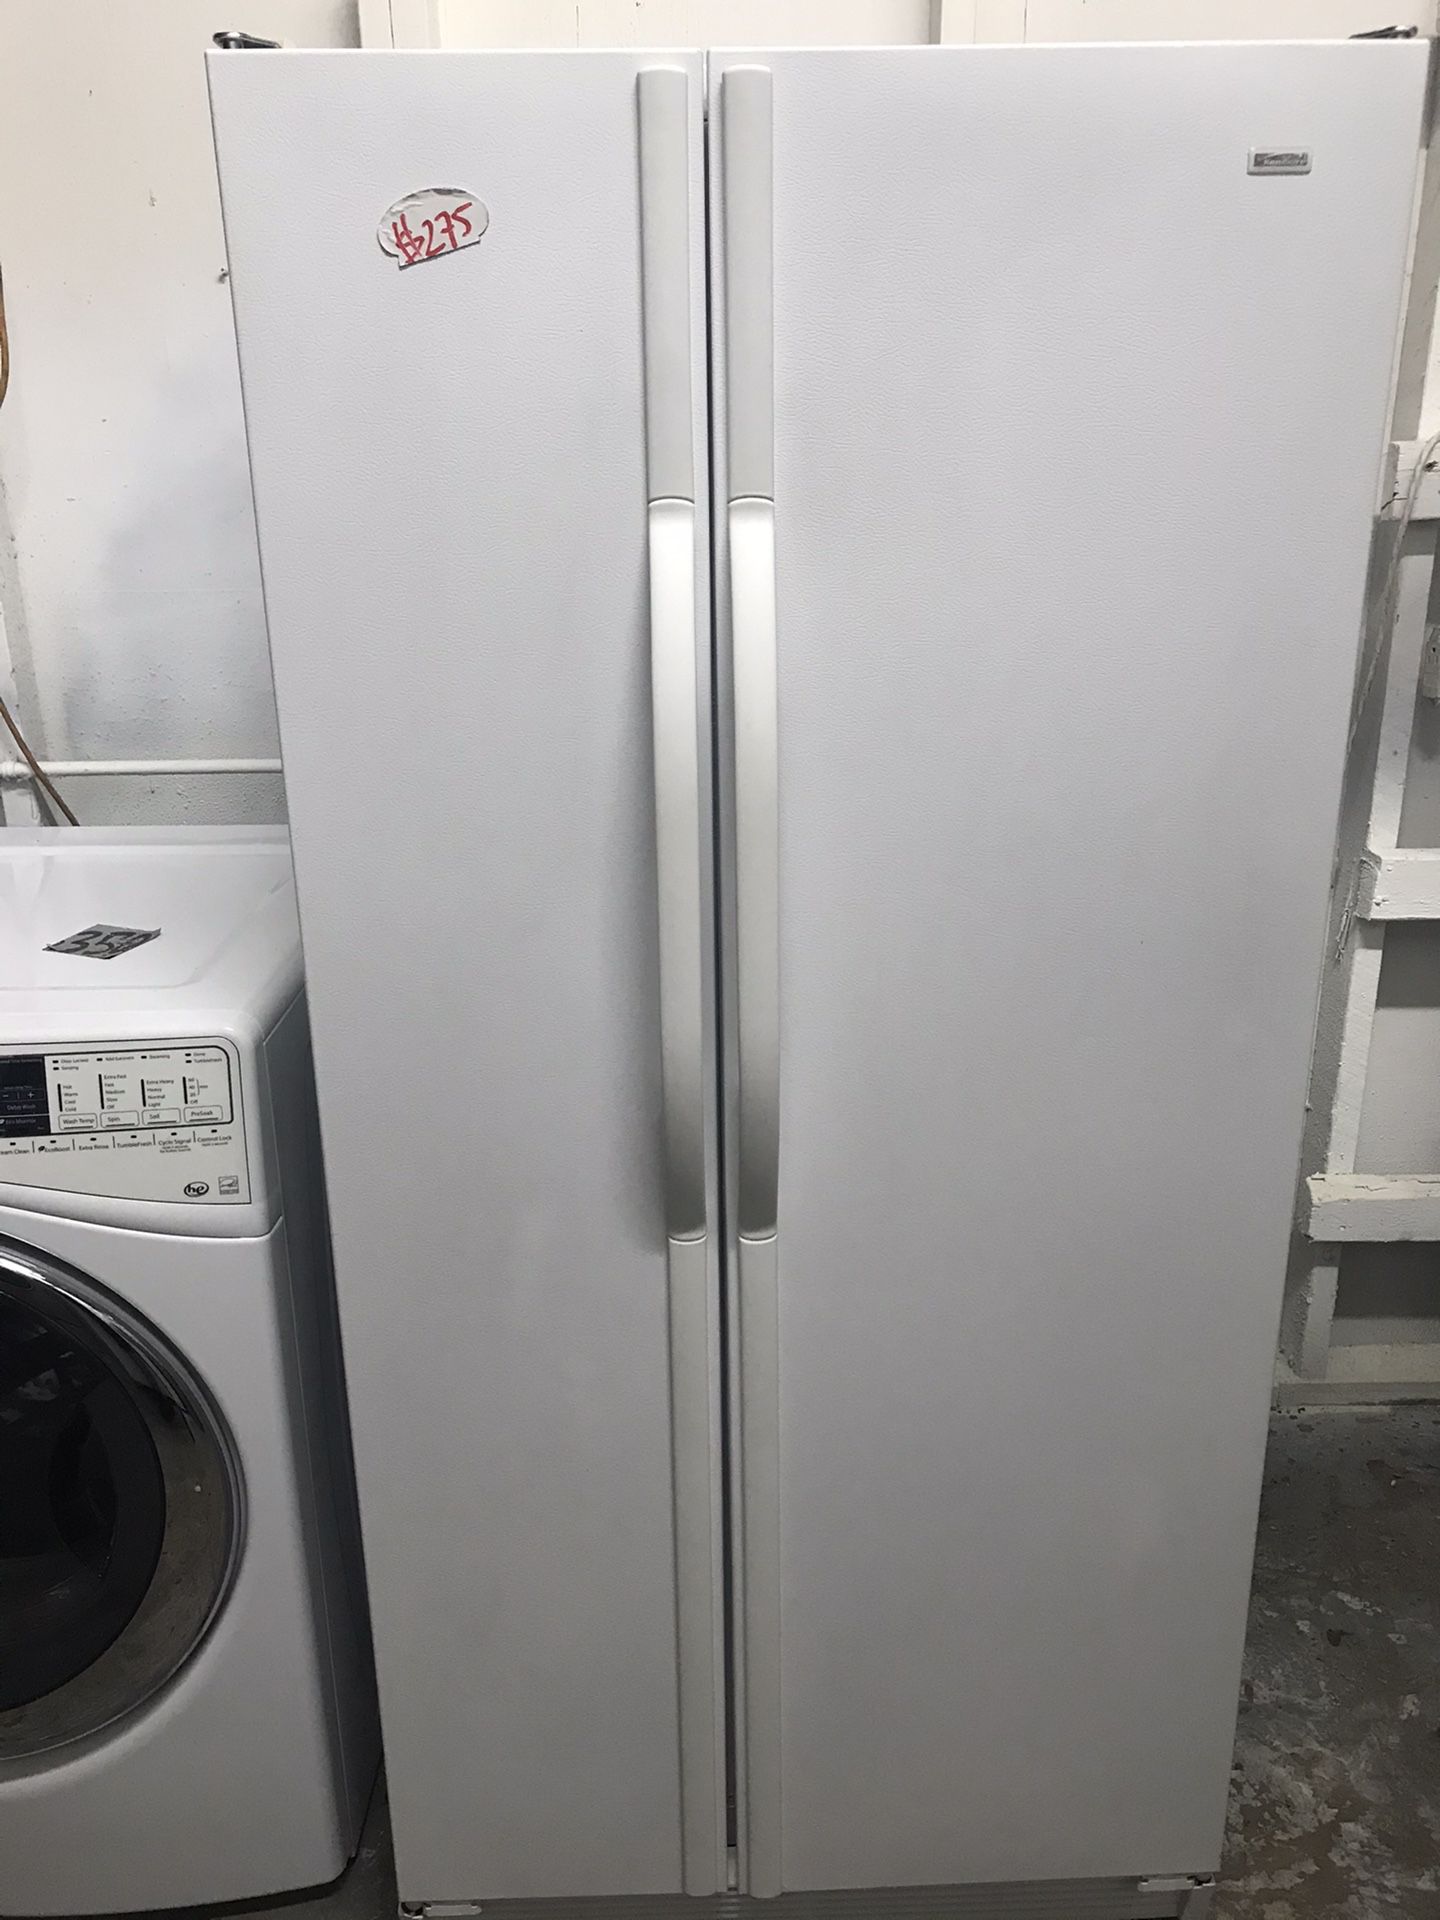 Kenmore white refrigerator 31” Wide 67” Tall in excellent condition plus 6 months warranty. Delivery service available